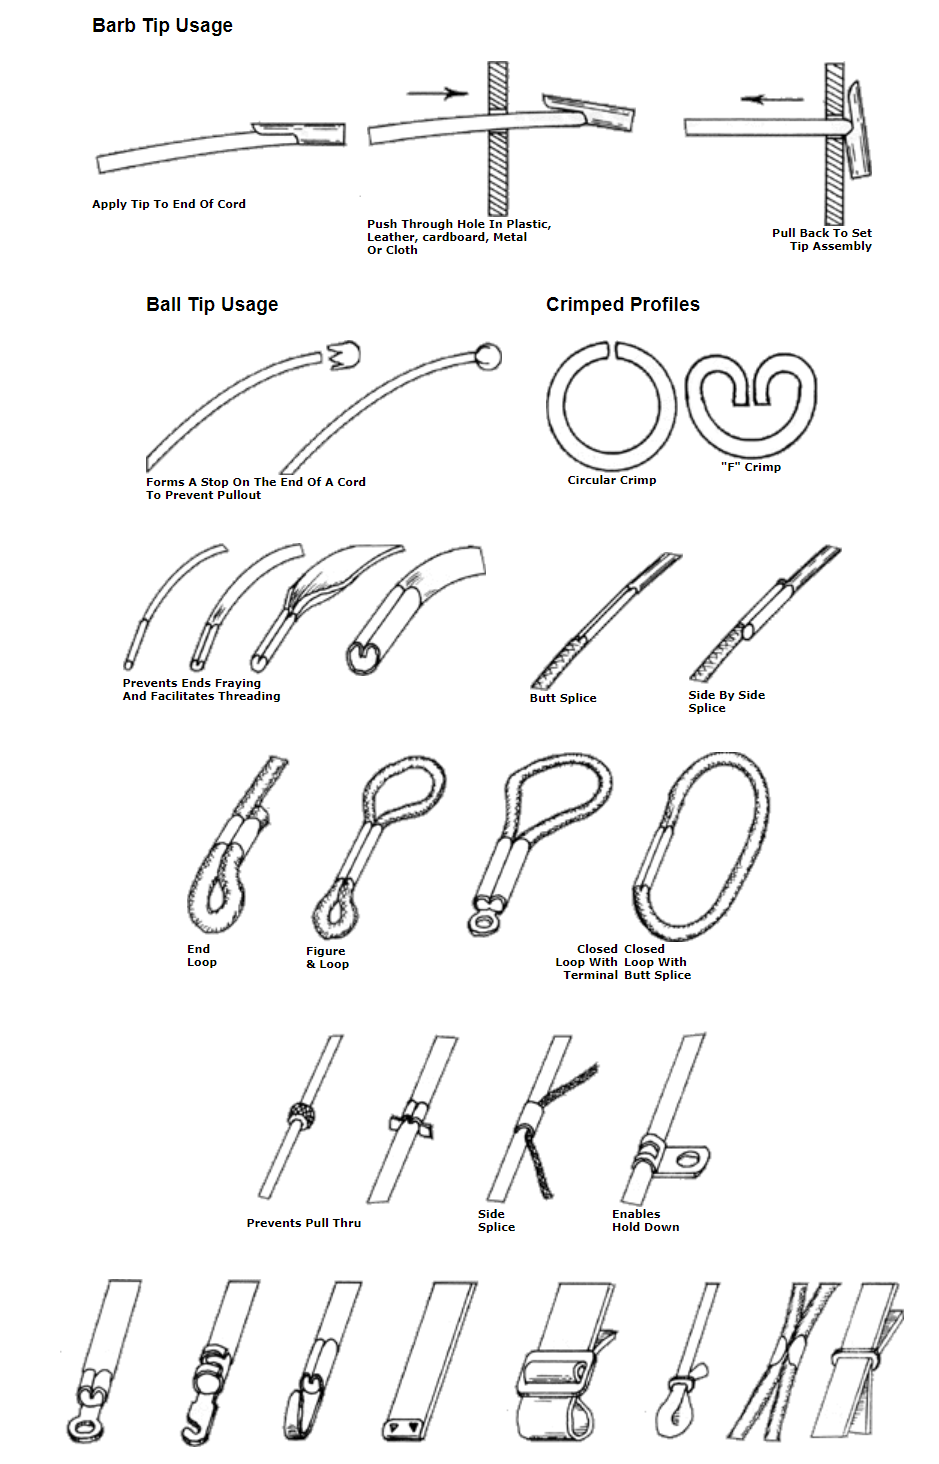 Textile Braid Hardware - Applications and Usage